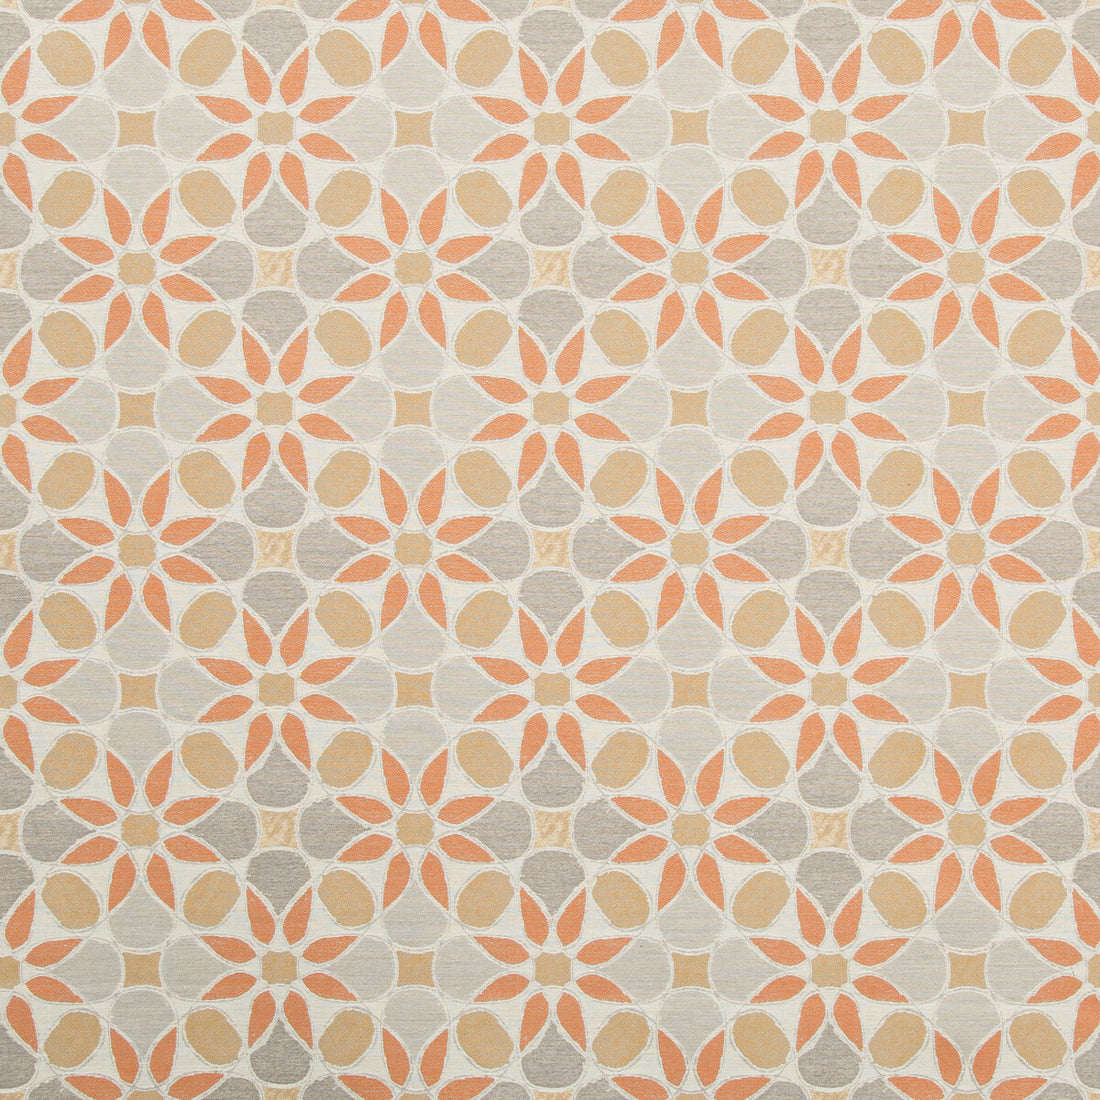 Tiepolo fabric in spice color - pattern 35882.24.0 - by Kravet Contract in the Gis Crypton Green collection